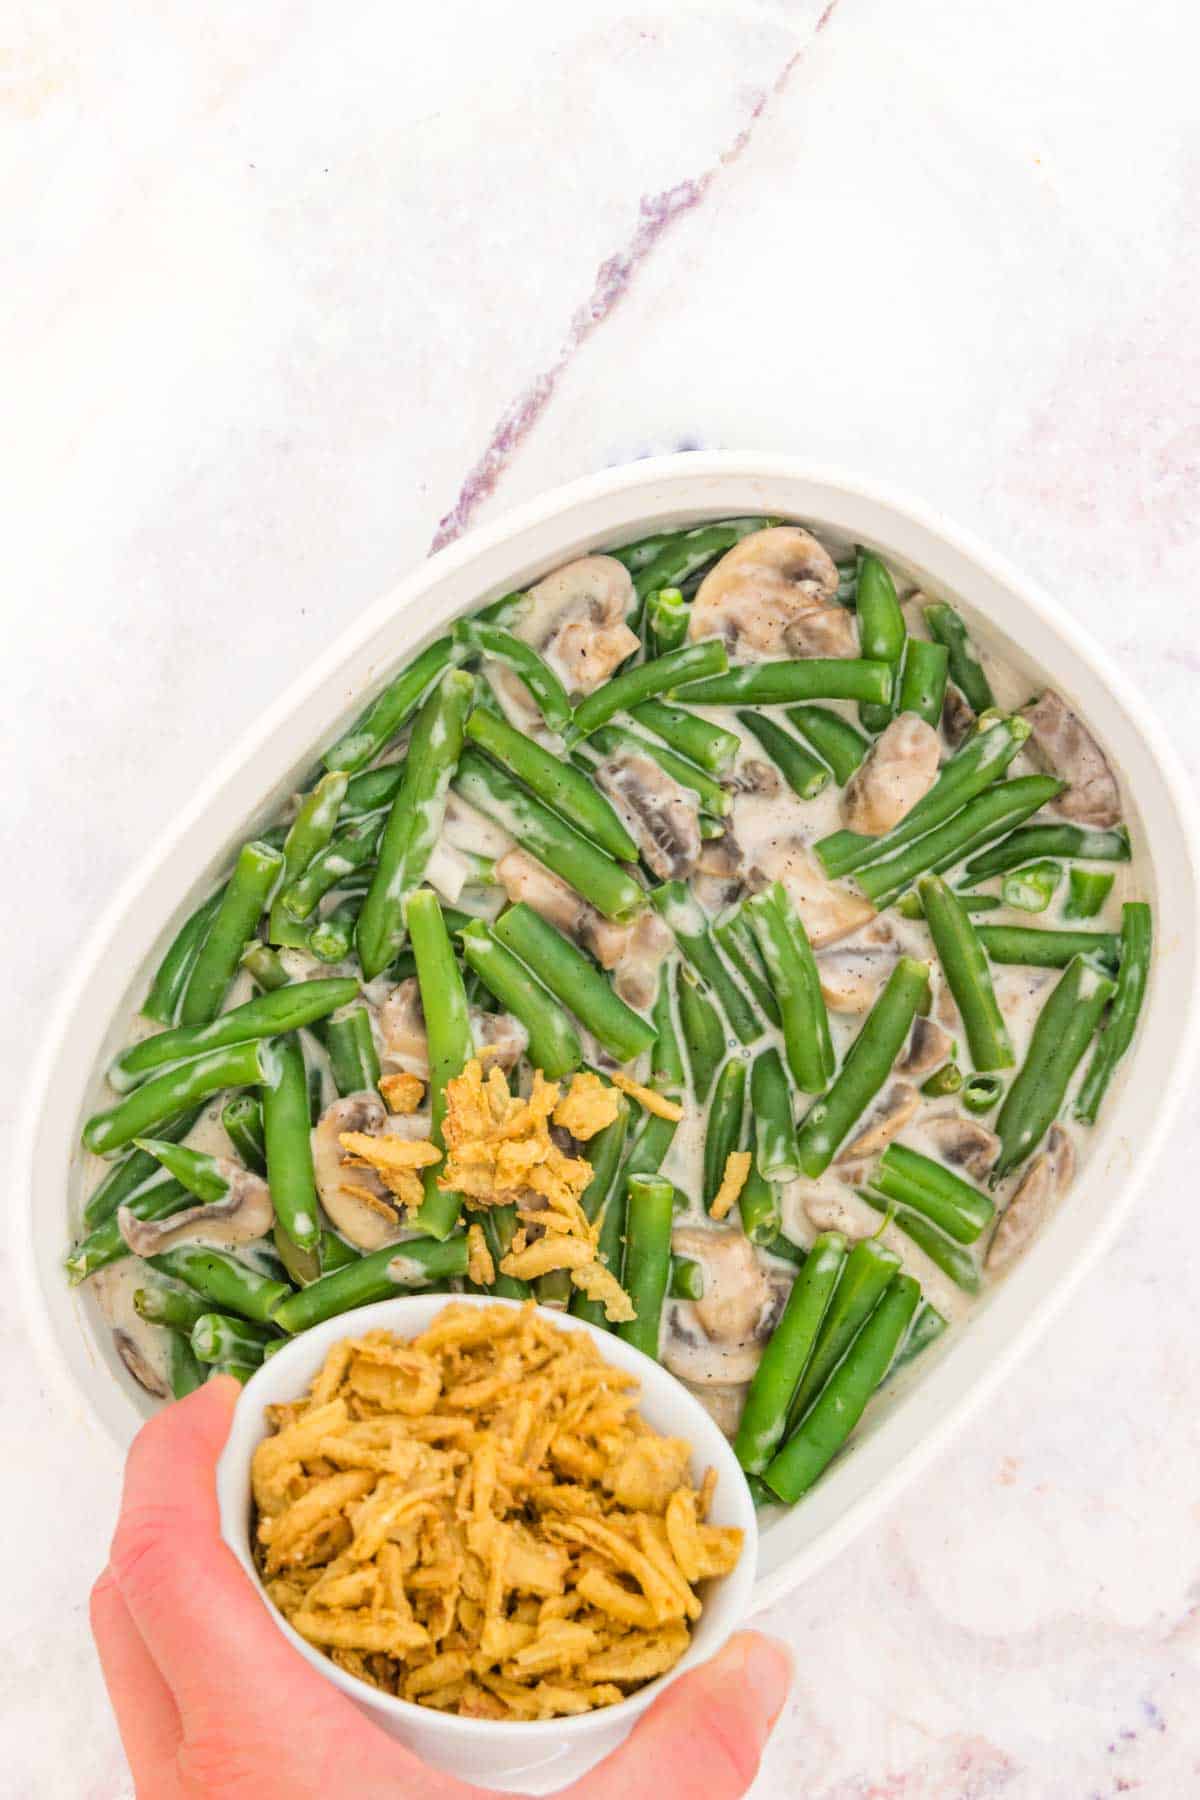 French fried onions are sprinkled over green bean casserole in a baking dish.